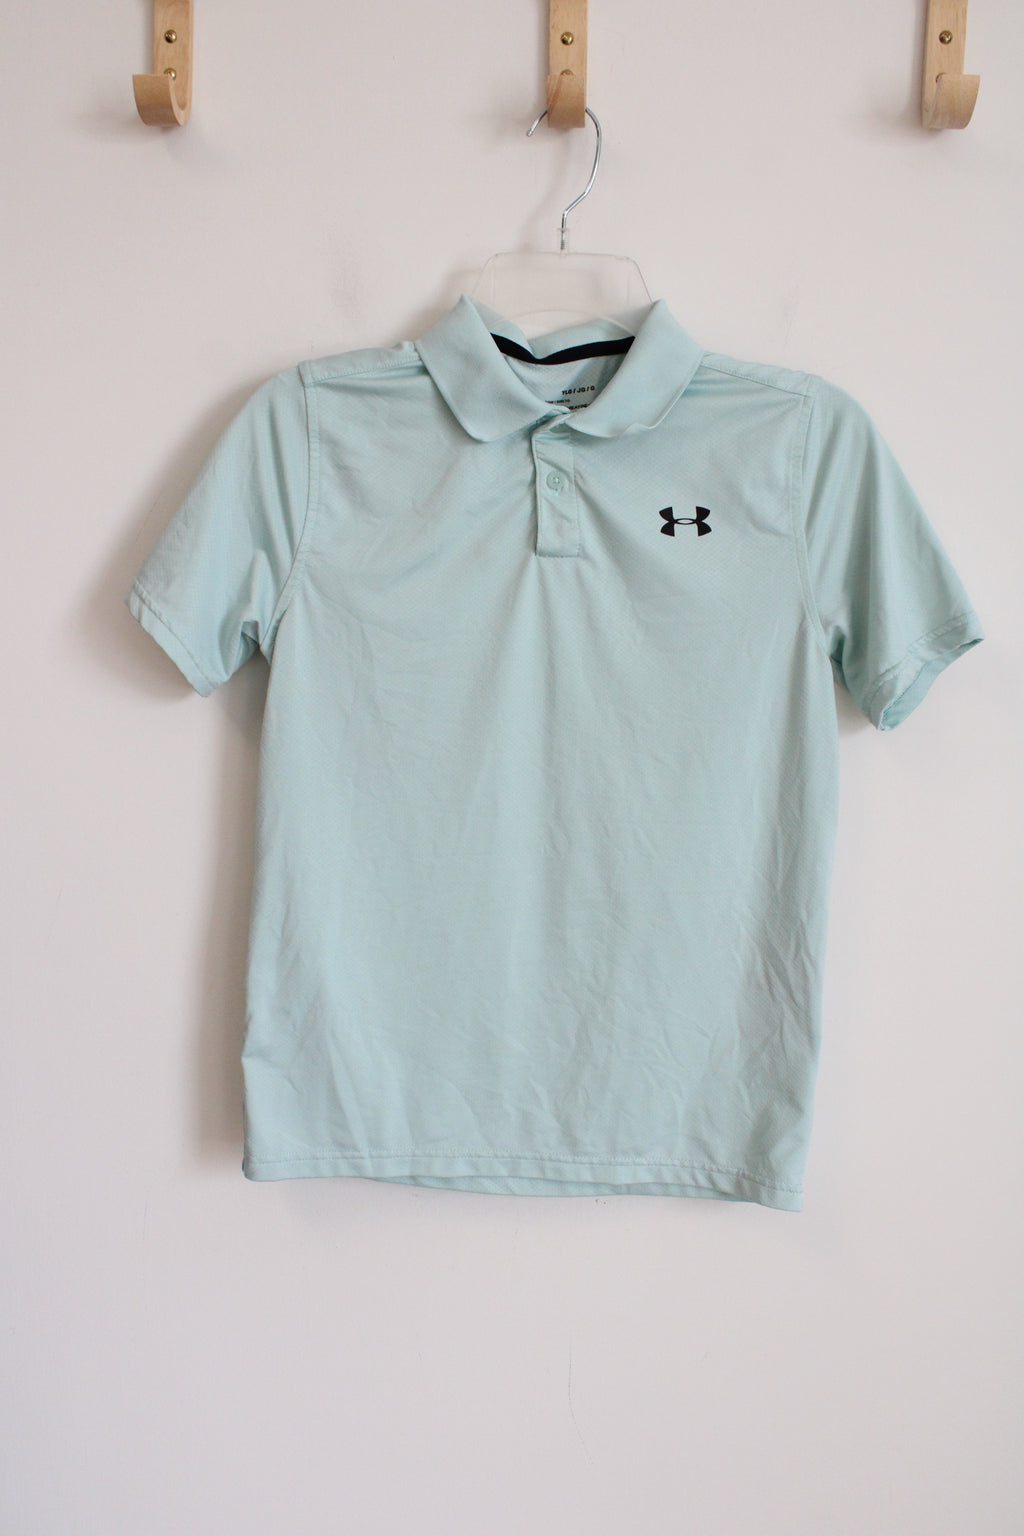 Under Armour Loose Fit HeatGear Light Blue Polo Shirt | Youth L (14/16))